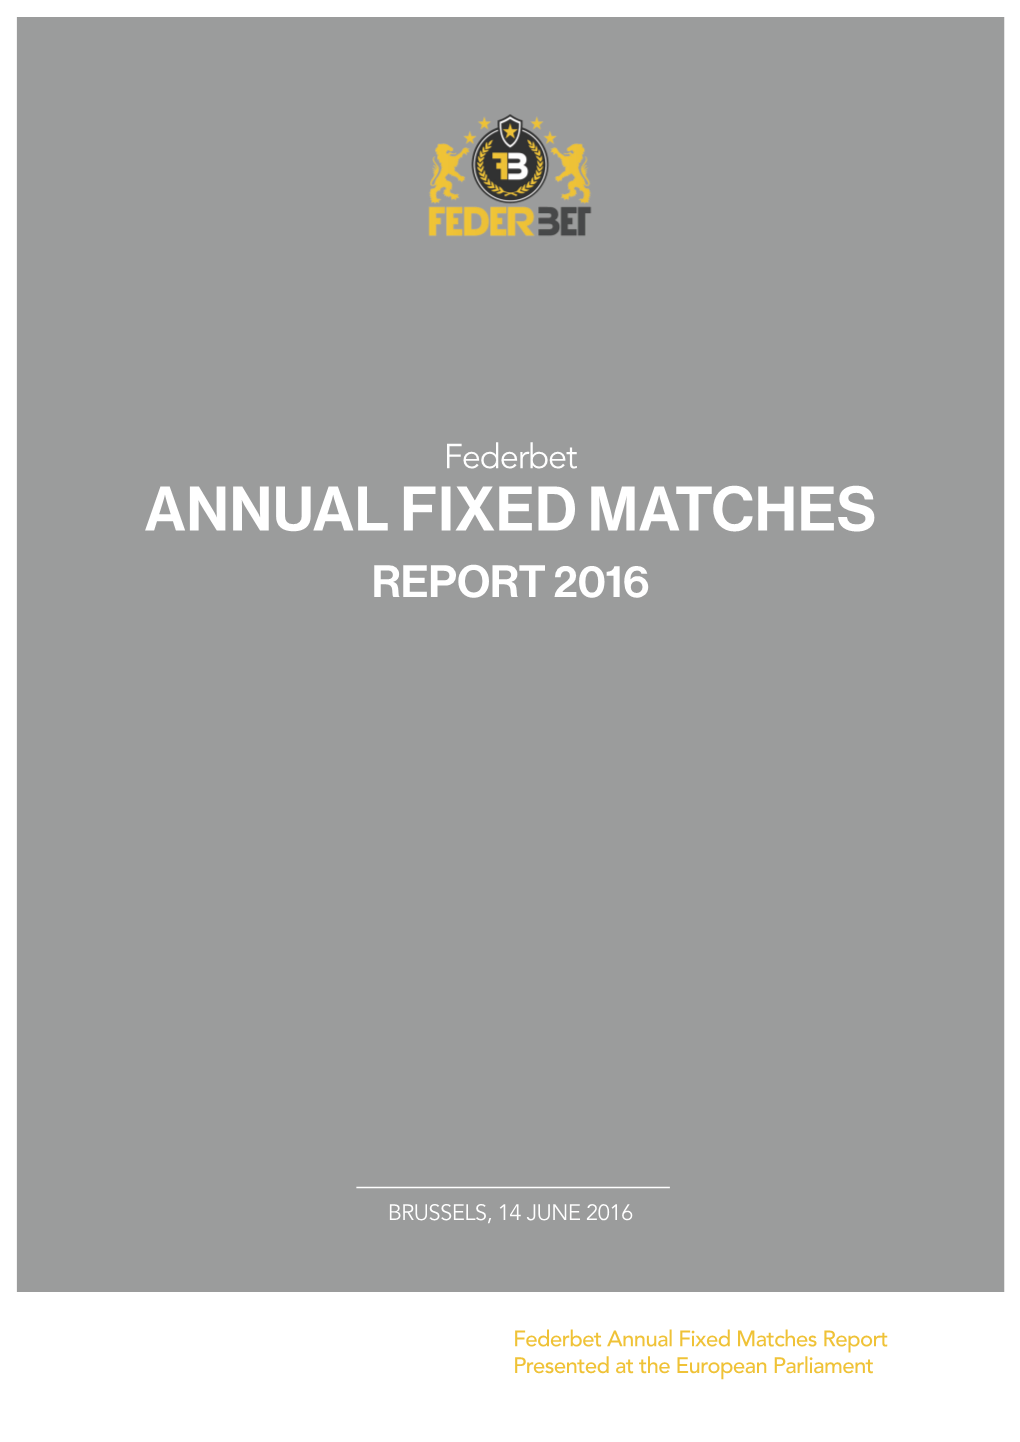 Annual Fixed Matches Report 2016